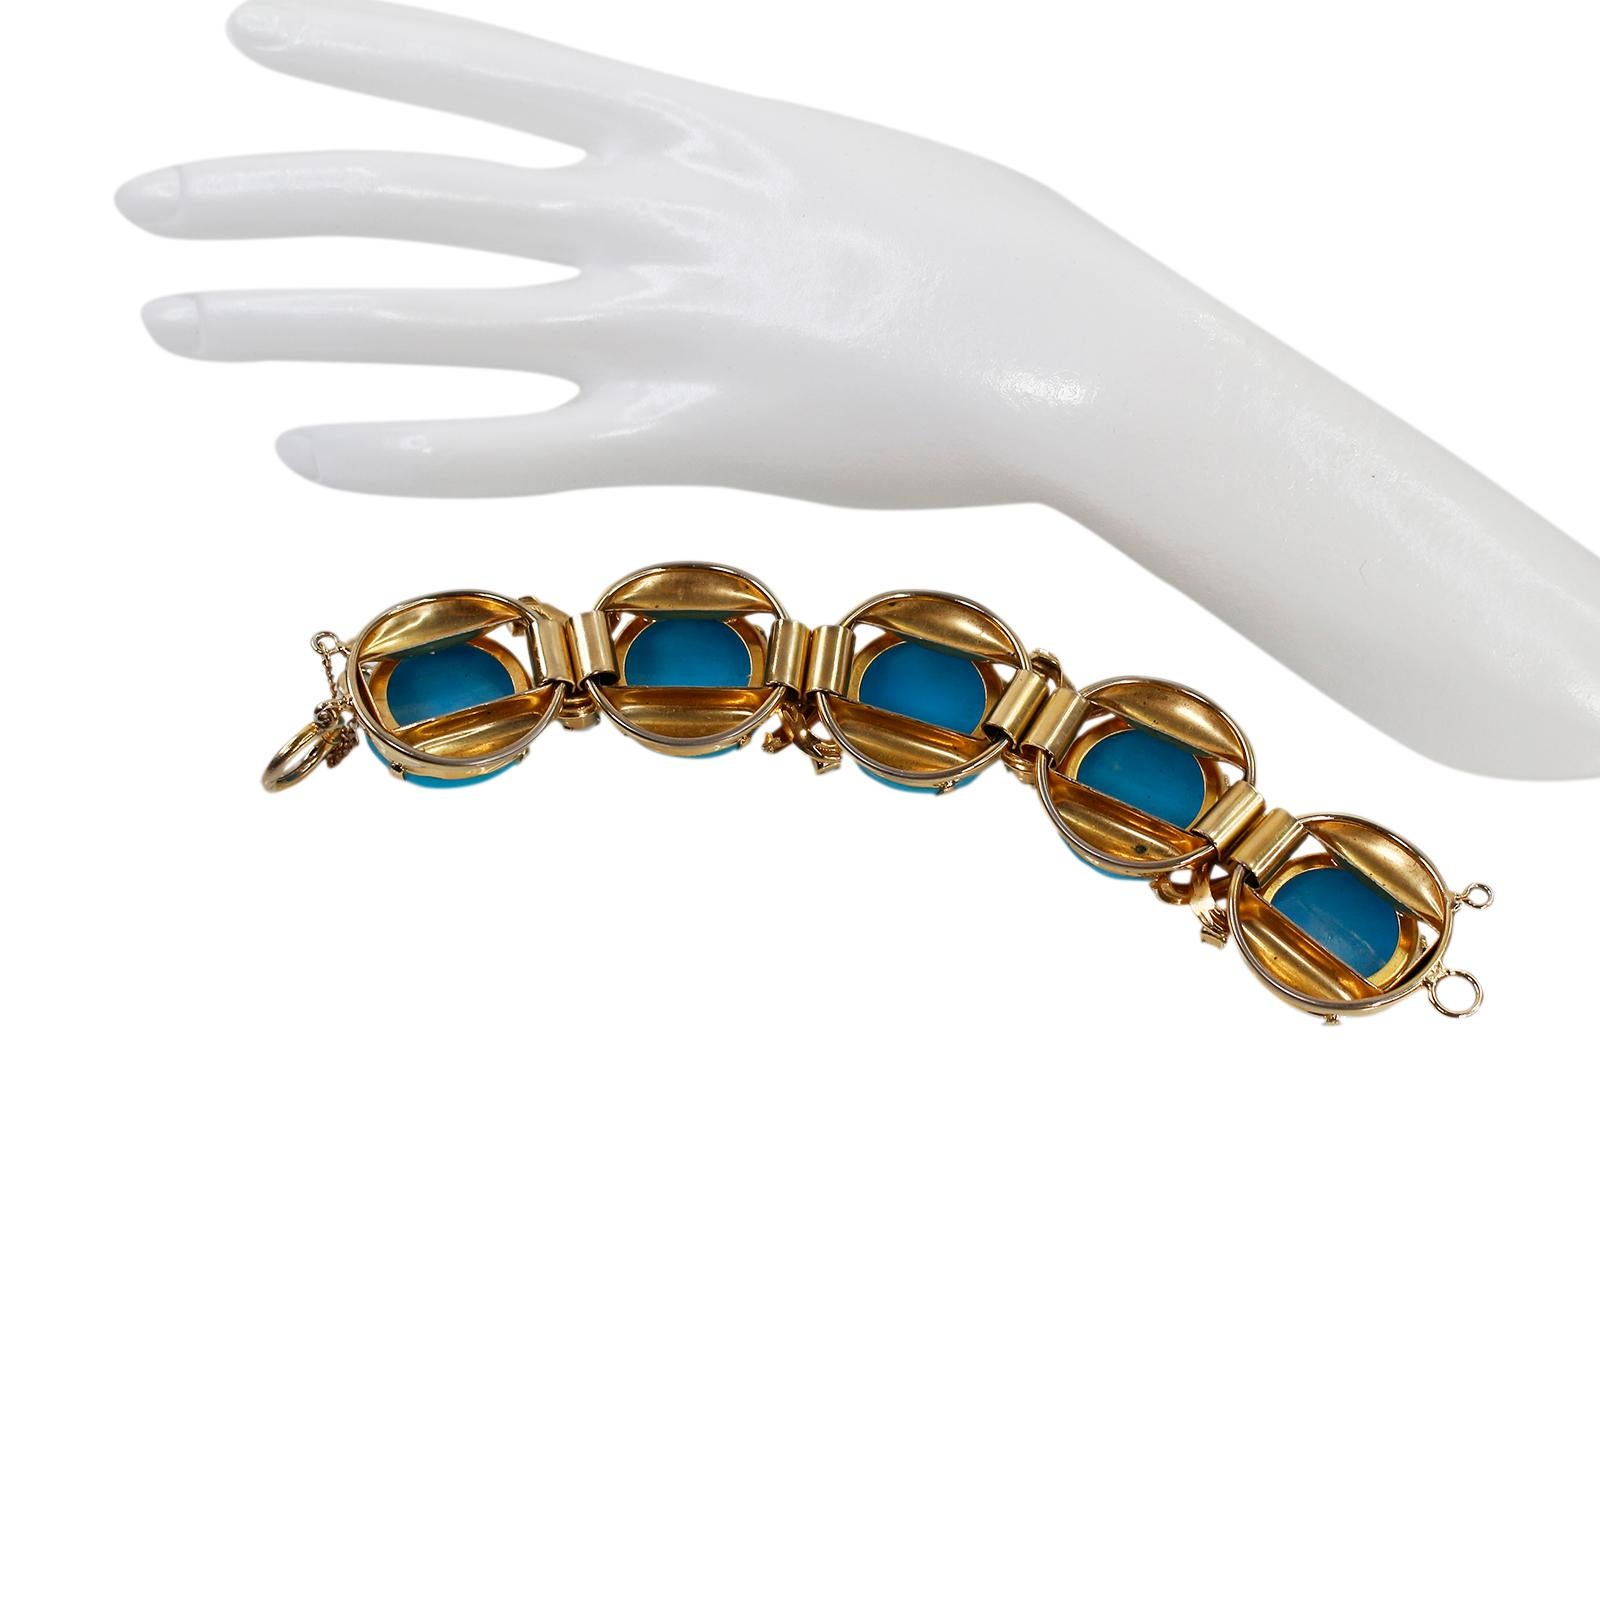 Vintage Unsigned Gold and Faux Turquoise Bracelet Circa 1960s For Sale 7